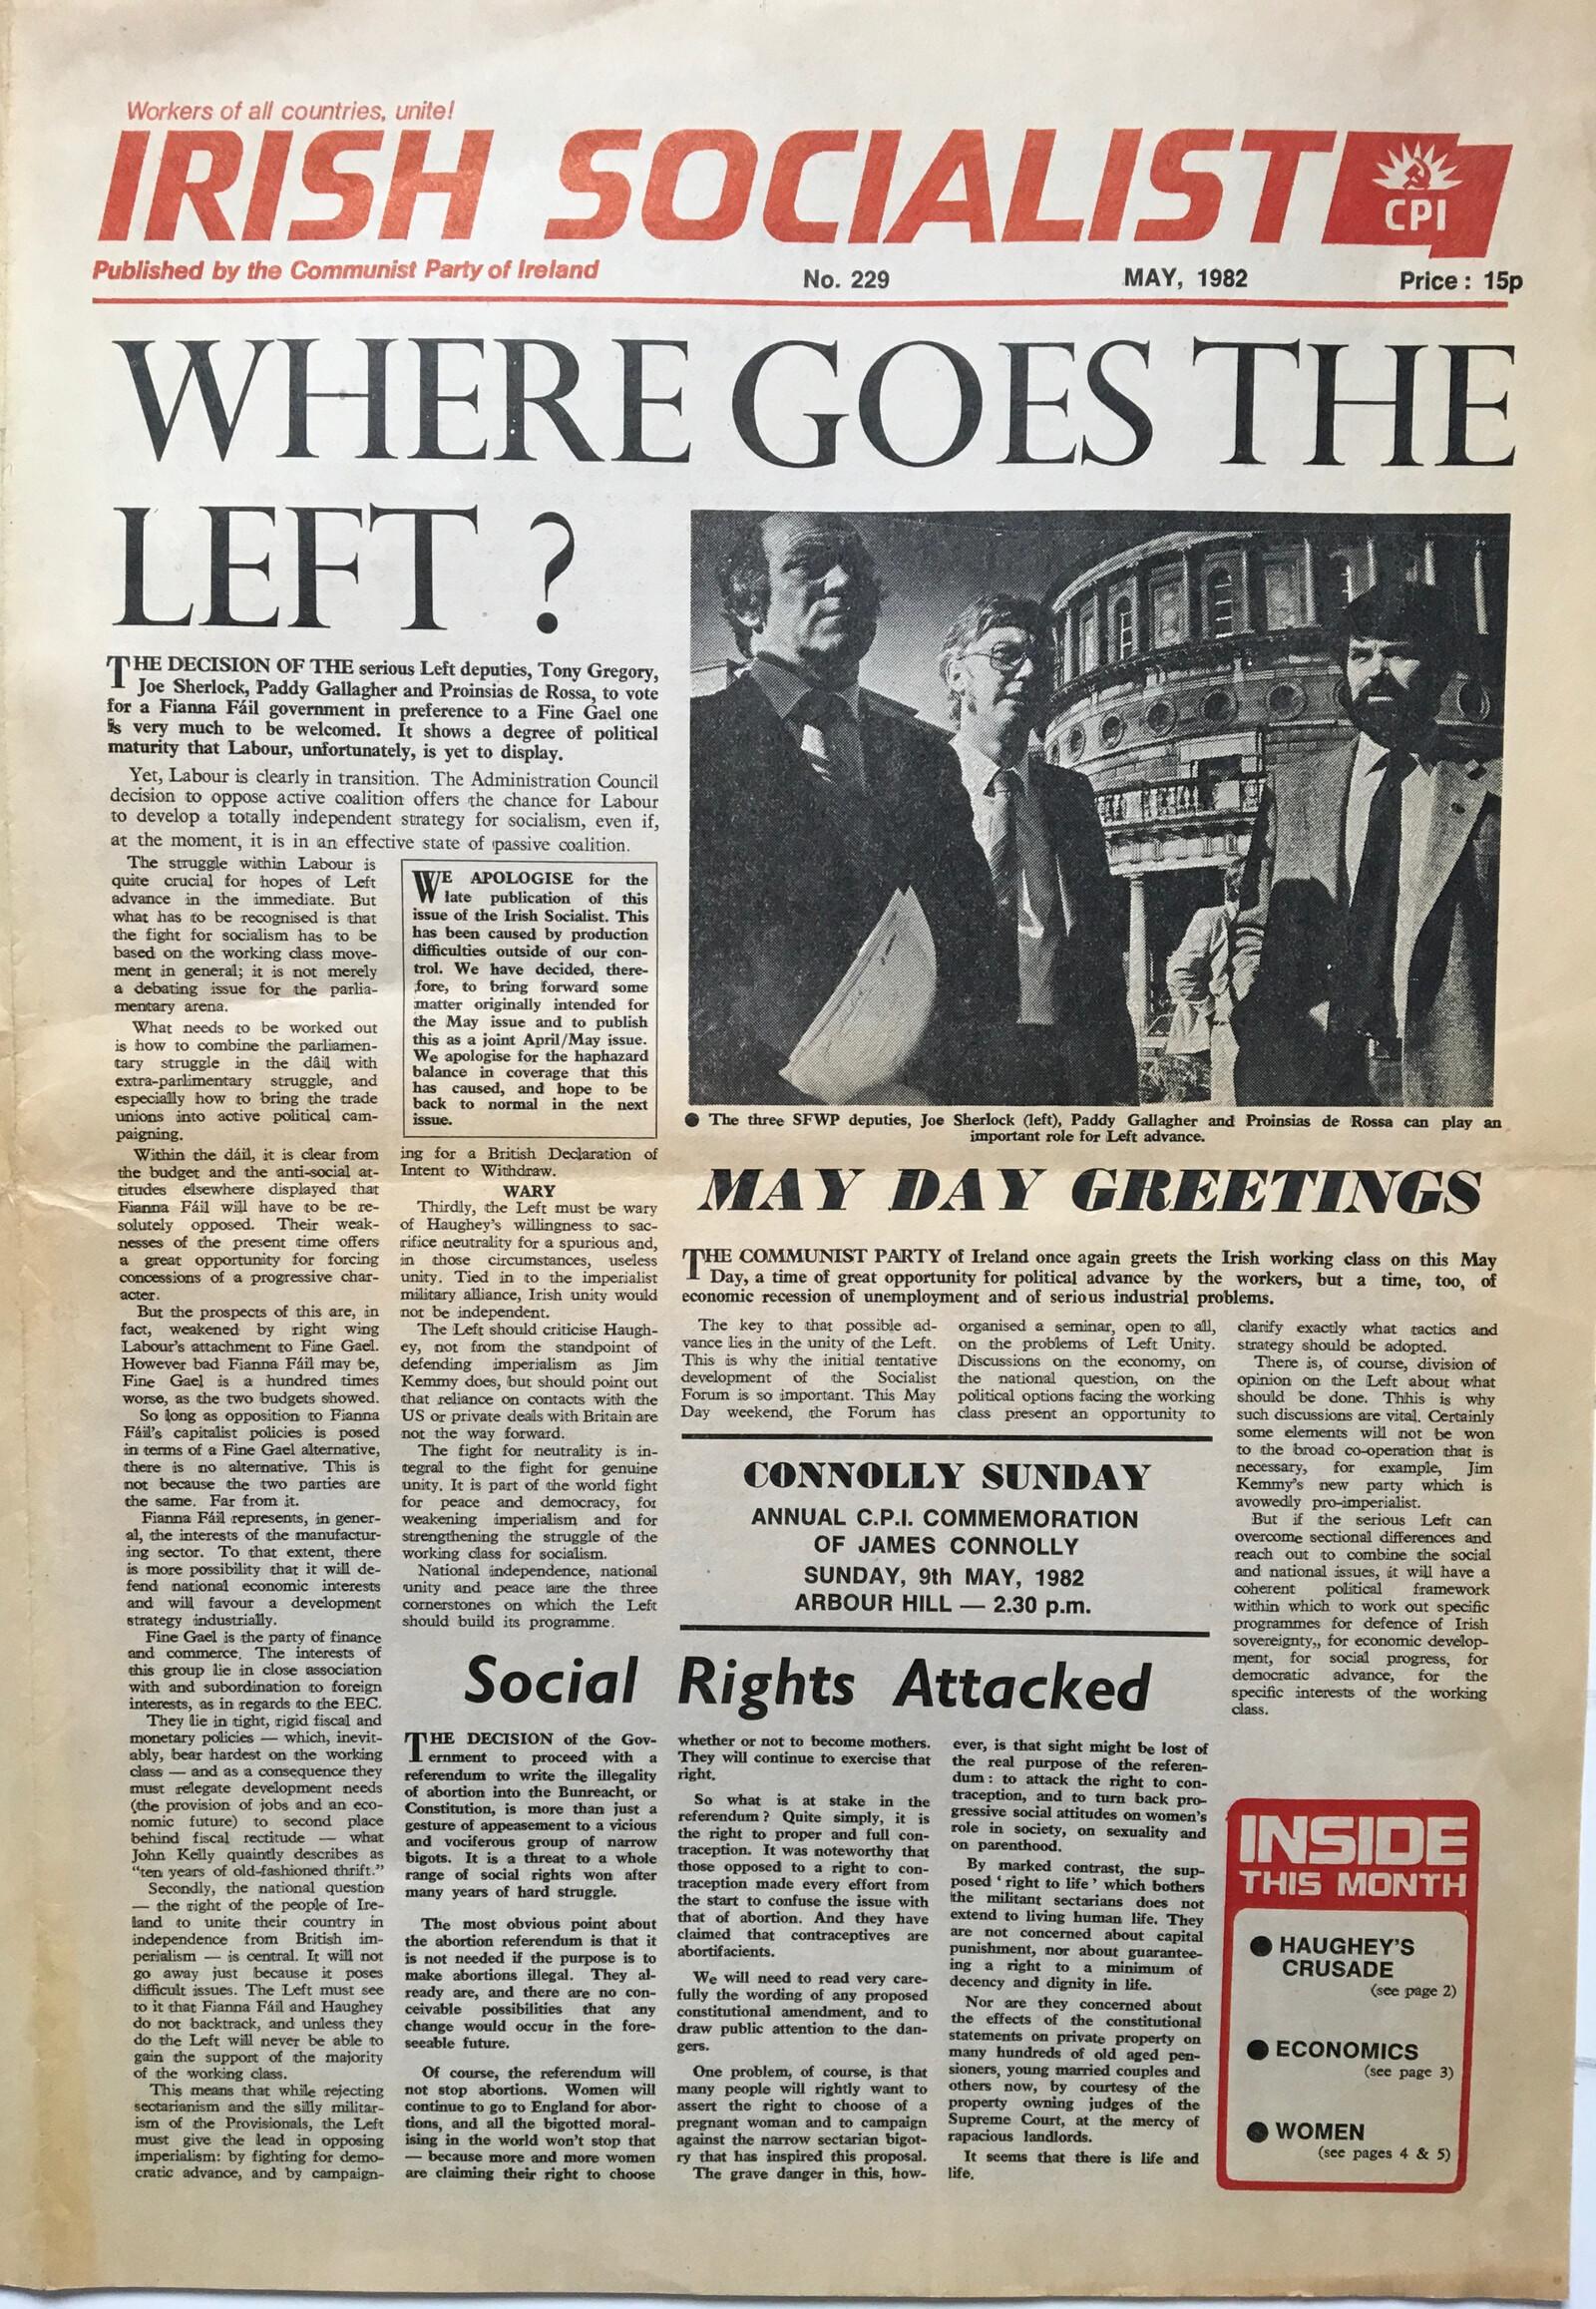 Front page of Irish Socialist, newspaper of the Communist Party of Ireland, from 1982 with the headlines "Where Goes the Left?" and "May Day Greetings"